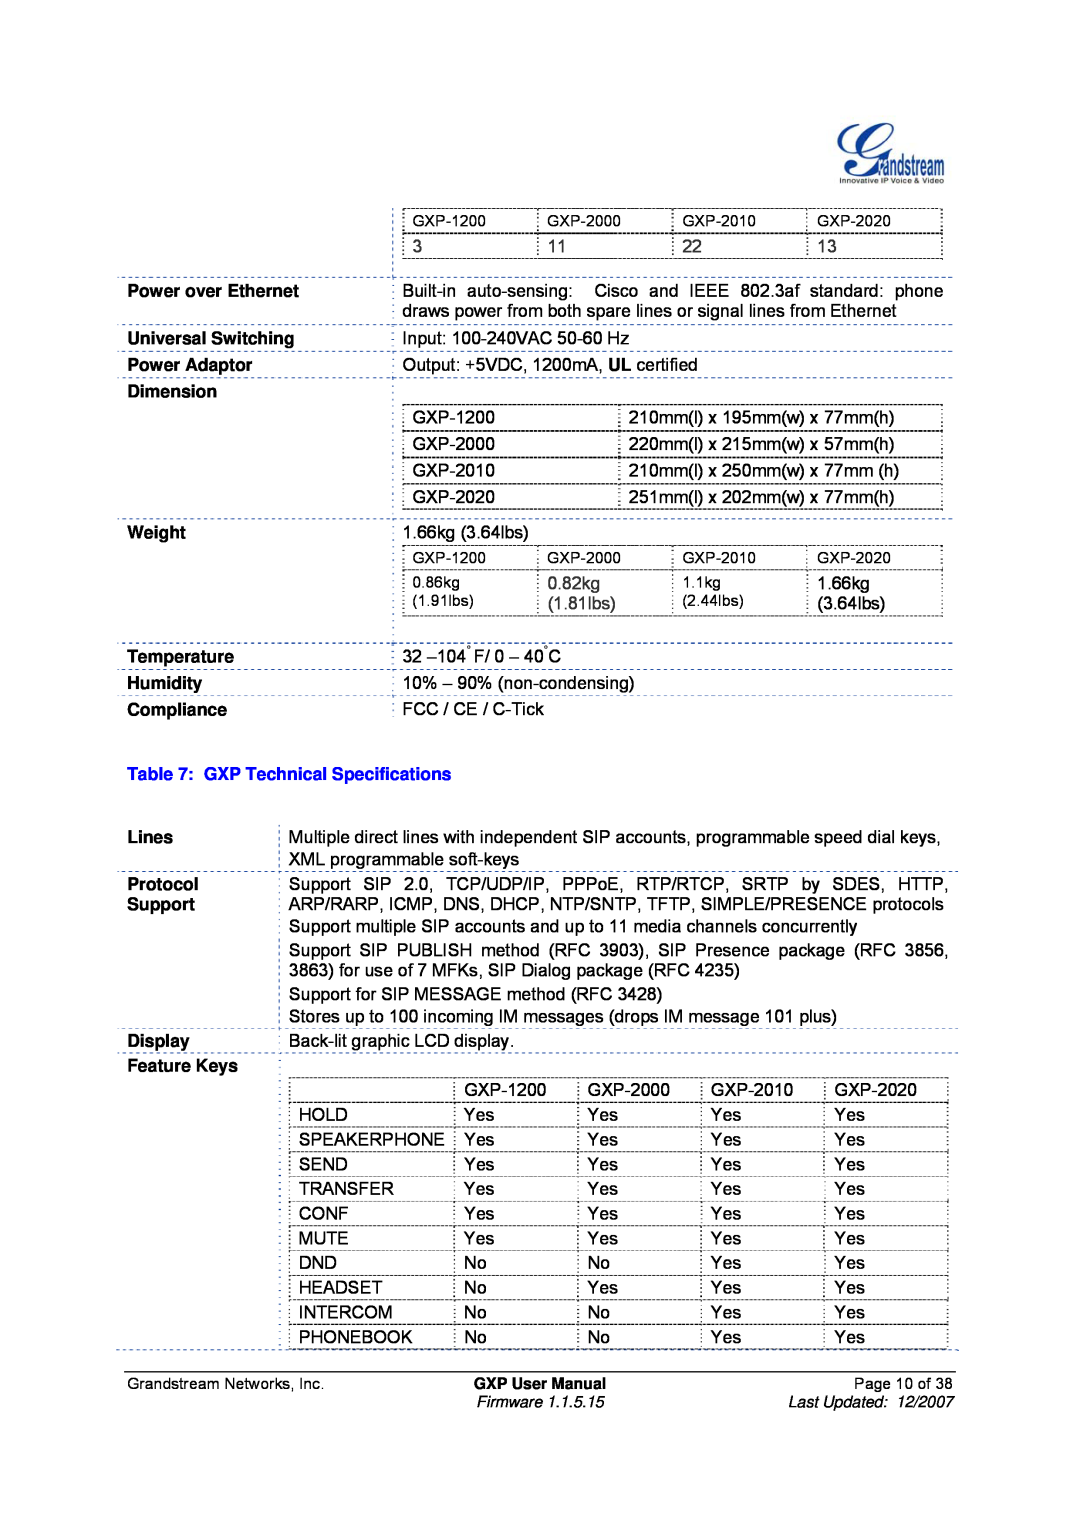 Grandstream Networks GXP-2010, GXP-1200 manual GXP Technical Specifications 